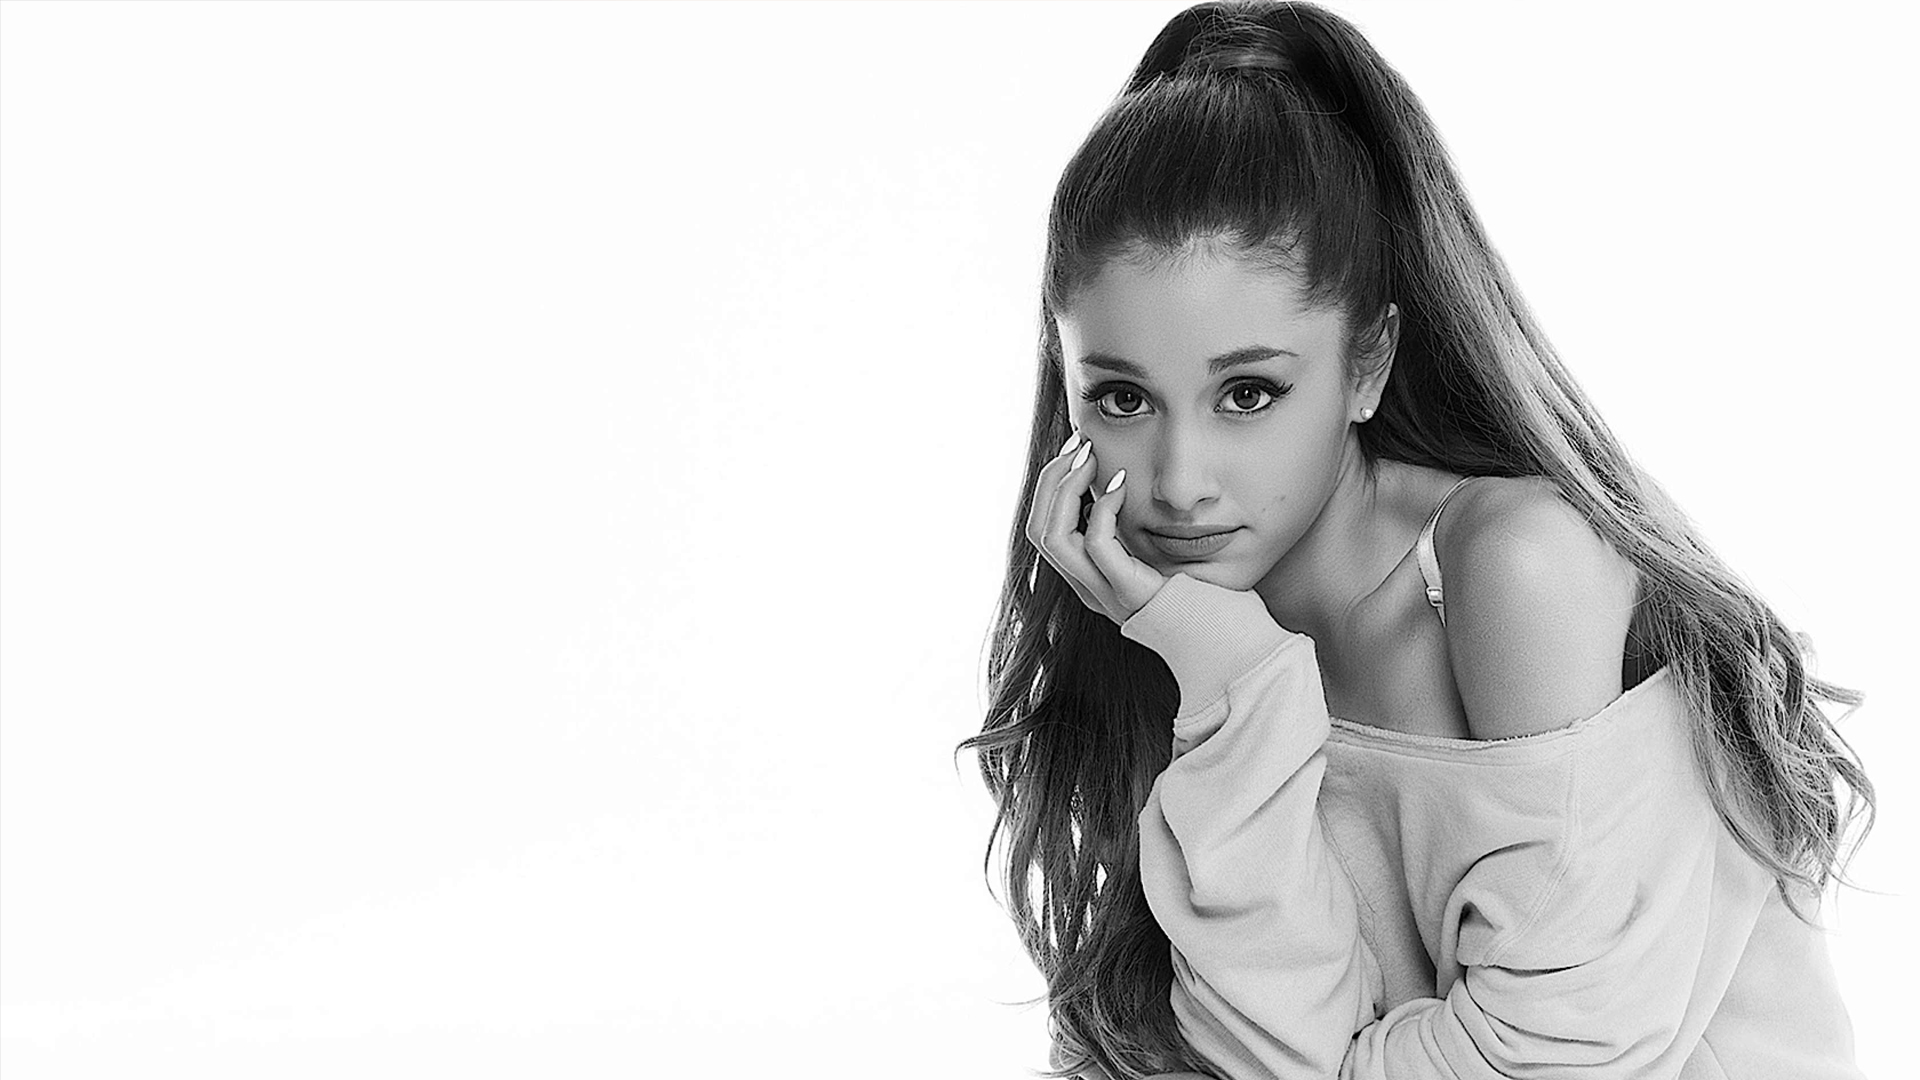 Free Download Ariana Grande Wallpaper Coll Hd I Hd Images 1920x1080 1920x1080 For Your Desktop Mobile Tablet Explore 29 Ariana Wallpaper Ariana Wallpaper Ariana Grande Xxxtentacion Wallpapers Ariana Grande